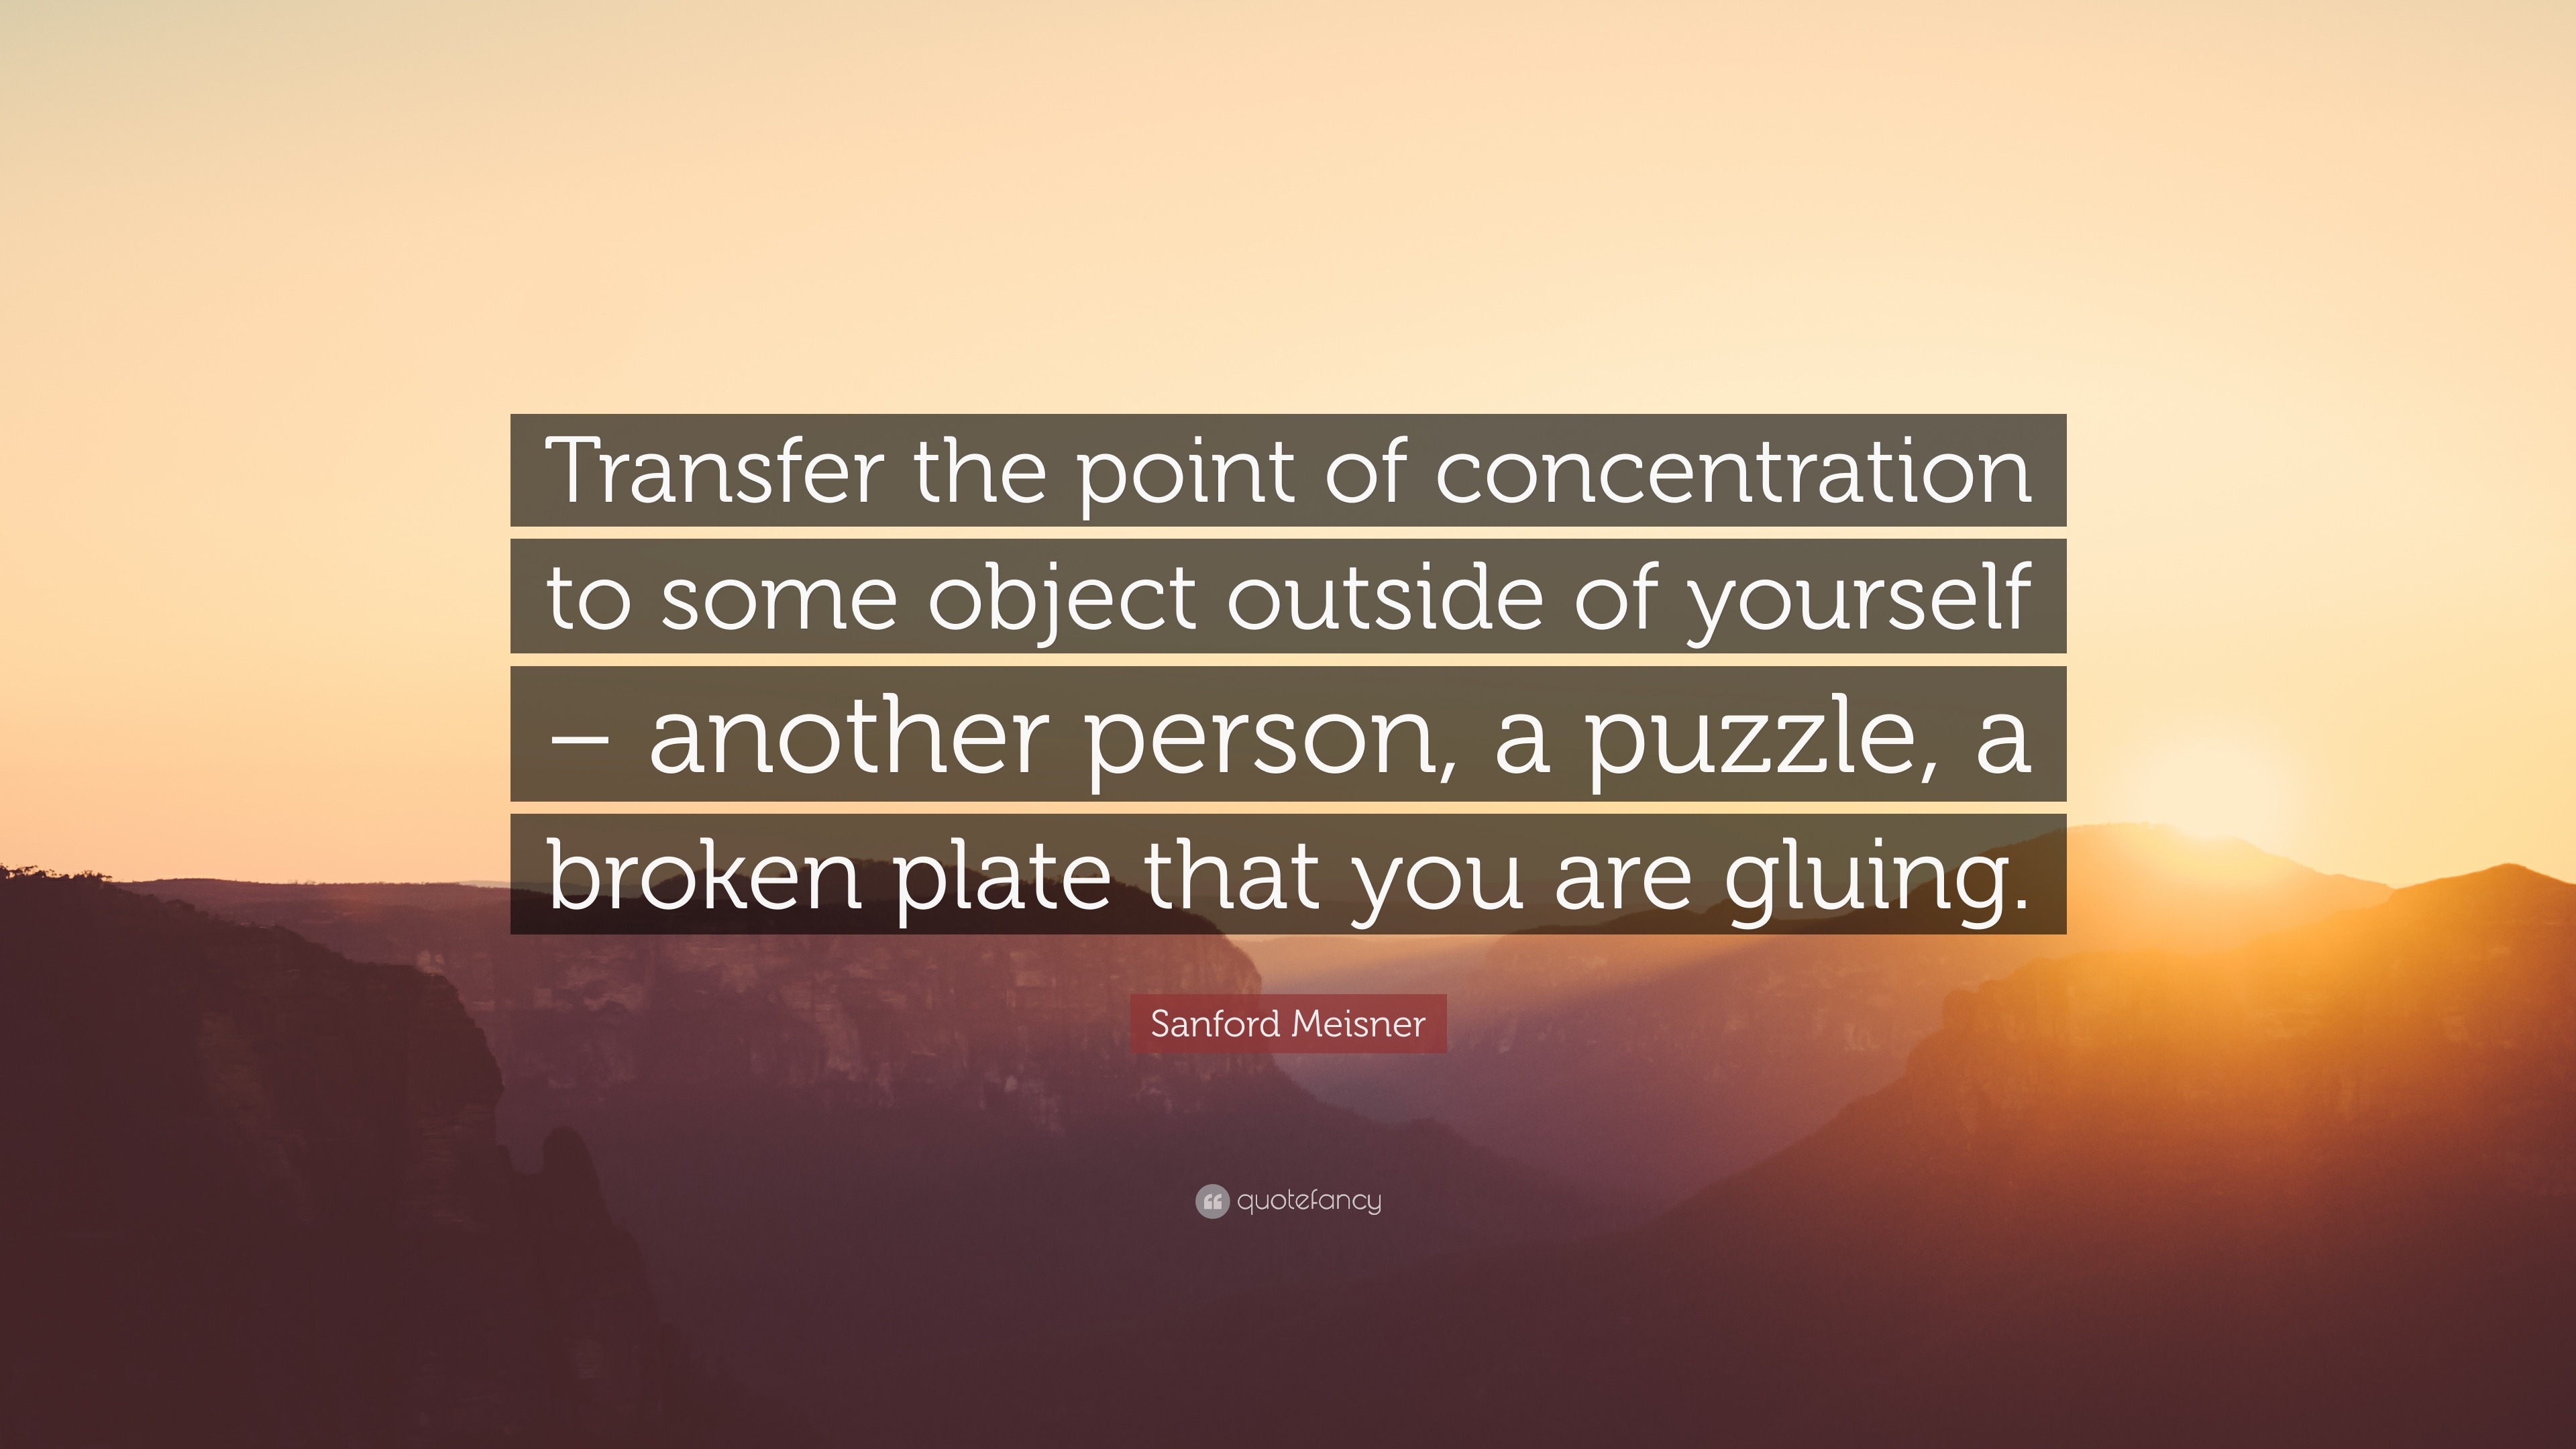 Sanford Meisner Quote: "Transfer the point of ...